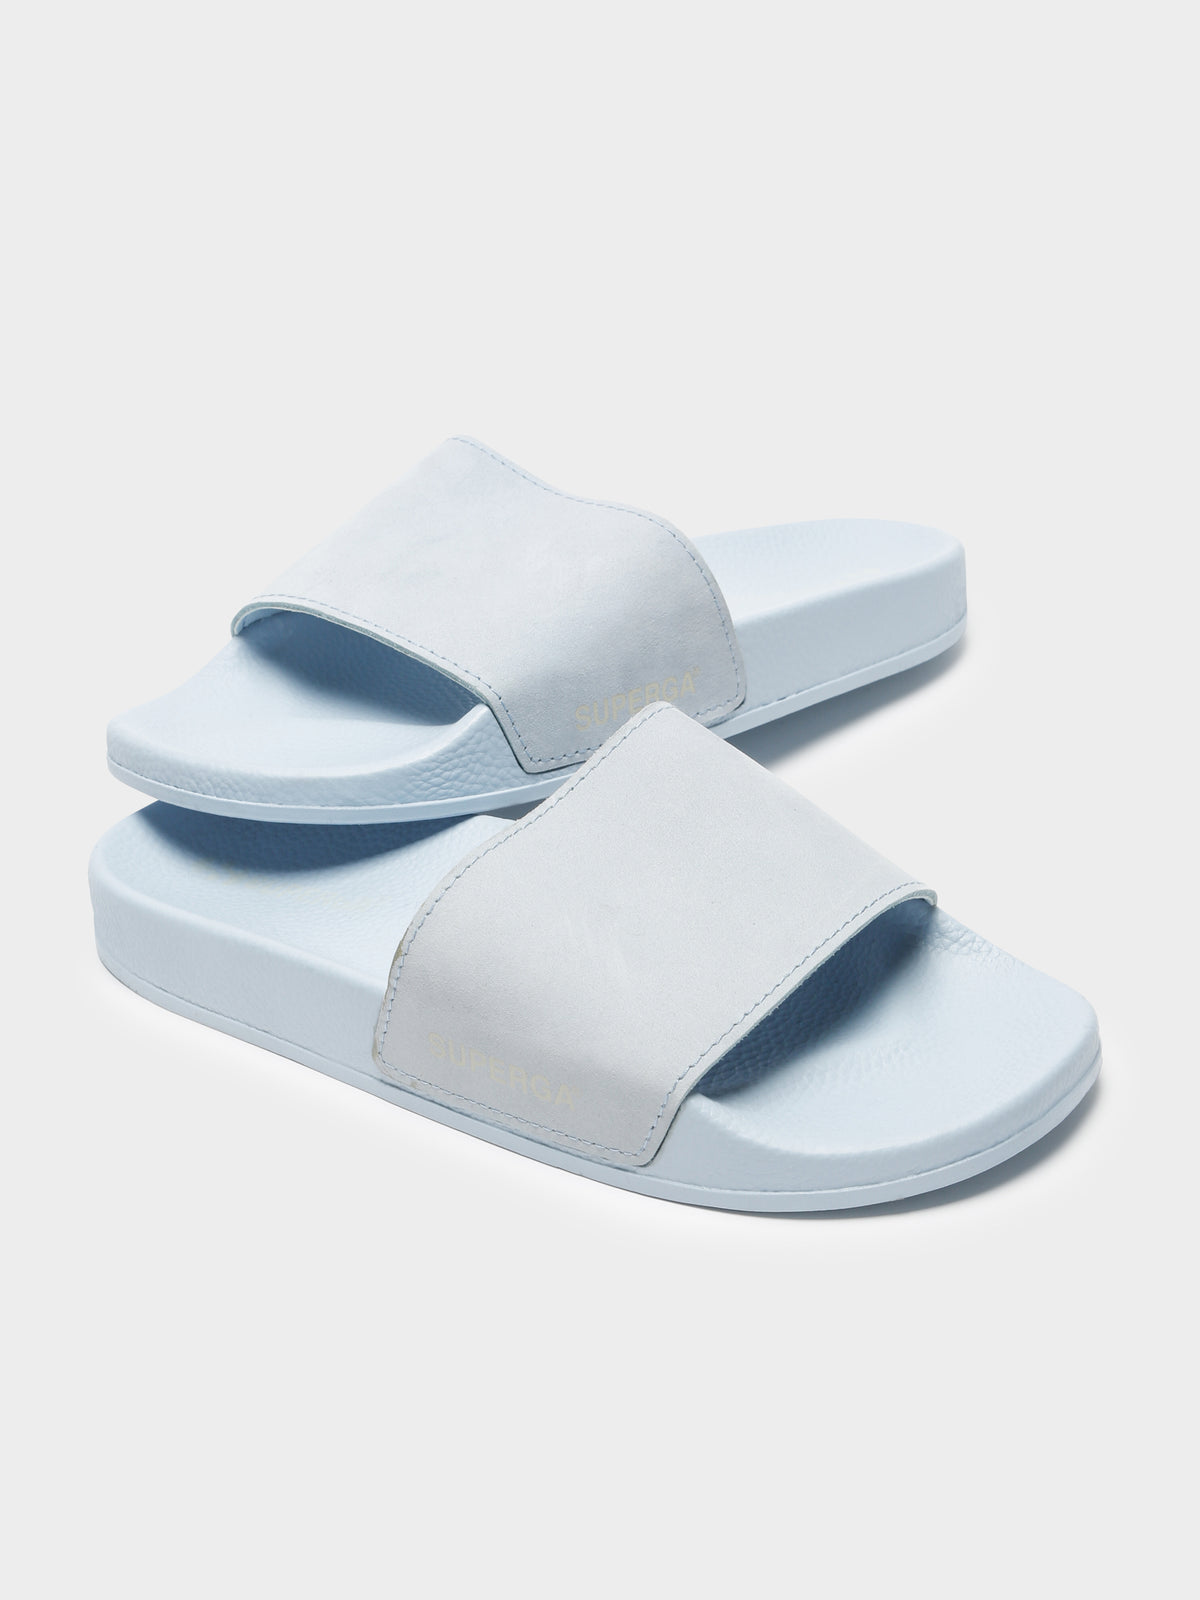 Womens 1908 Slides in Buttersoft Blue